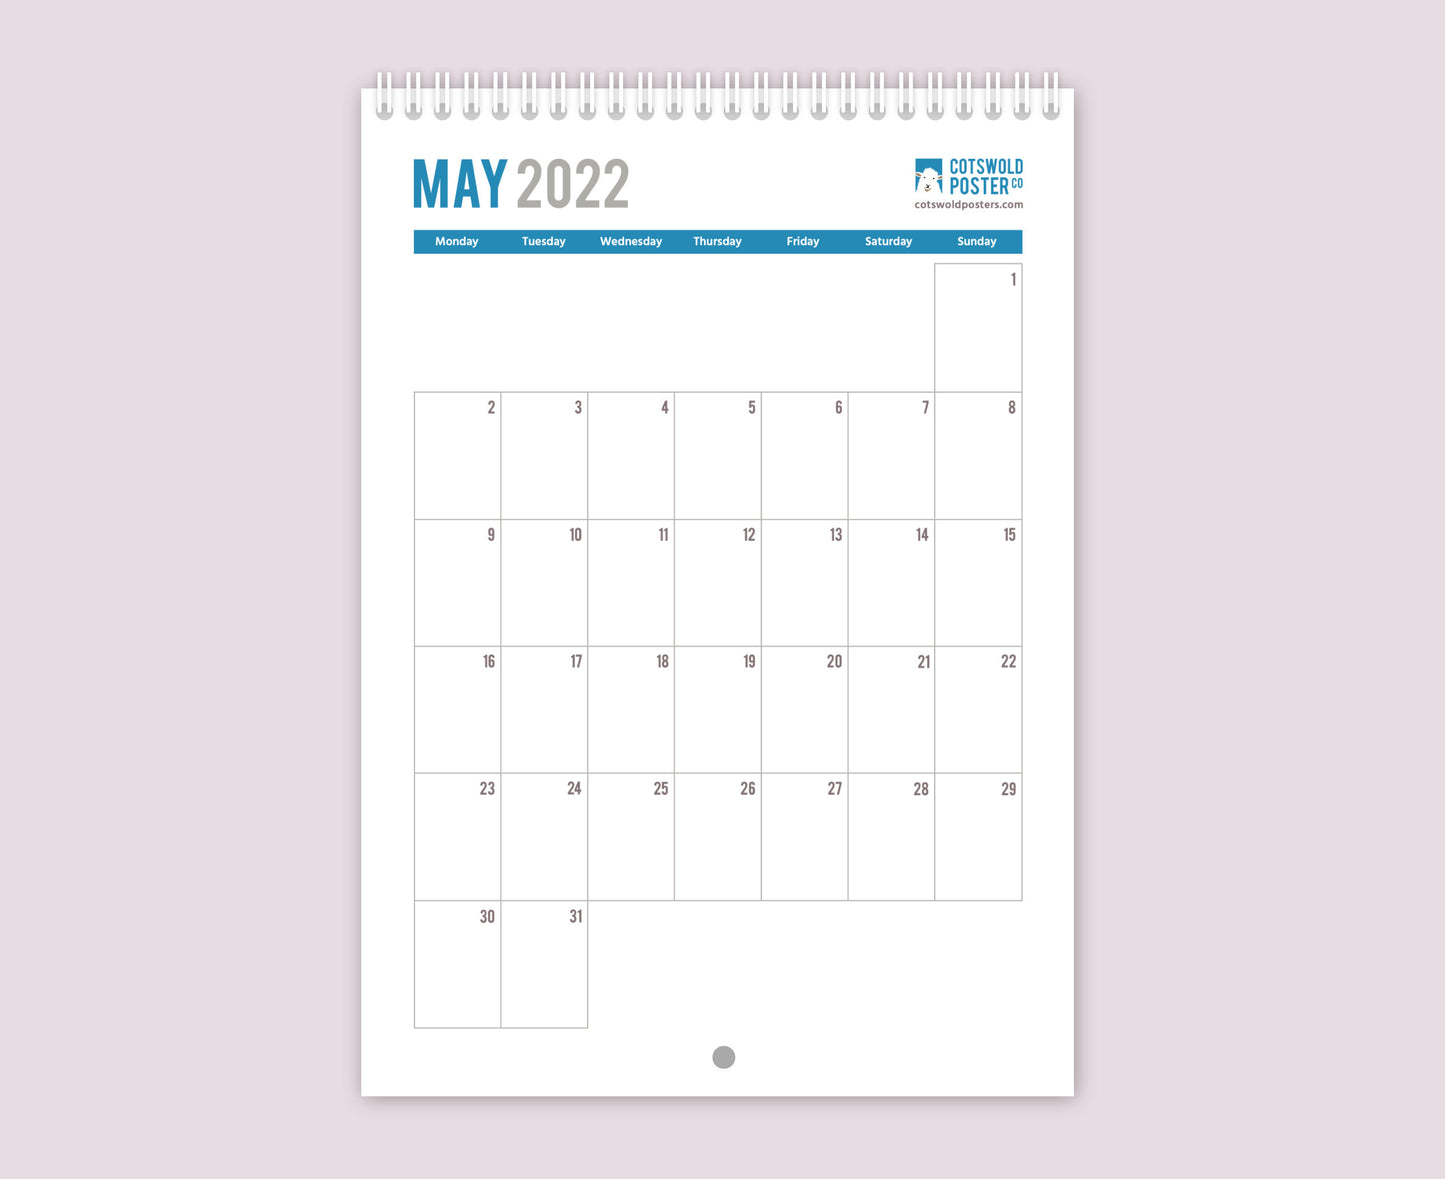 Stroud and Around 2022 Calendar month page May